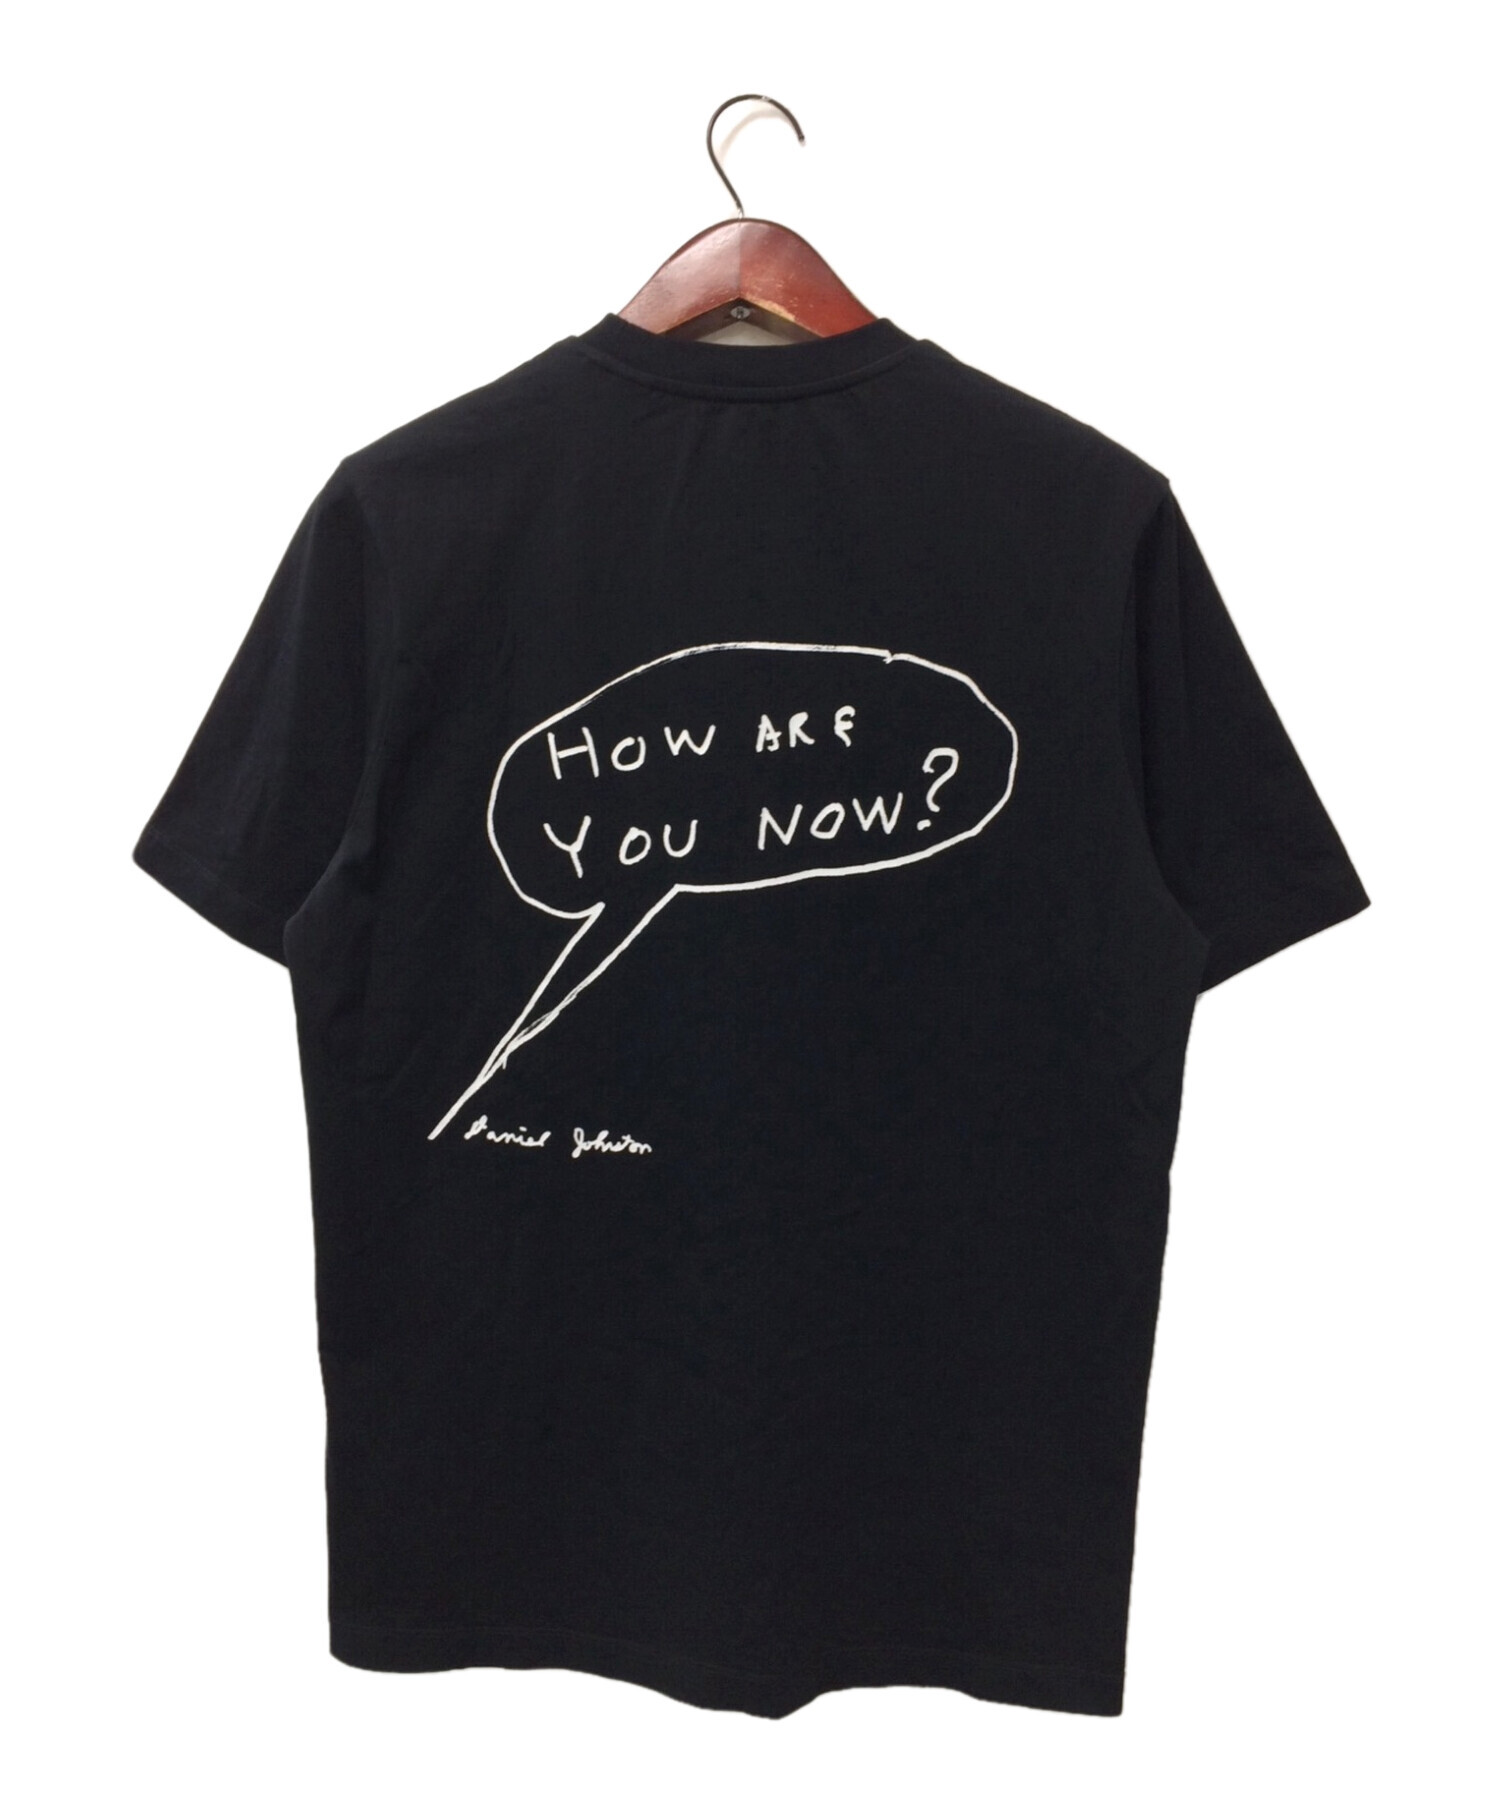 OAMC オーエーエムシー How Are You Now? Tシャツ smcint.com